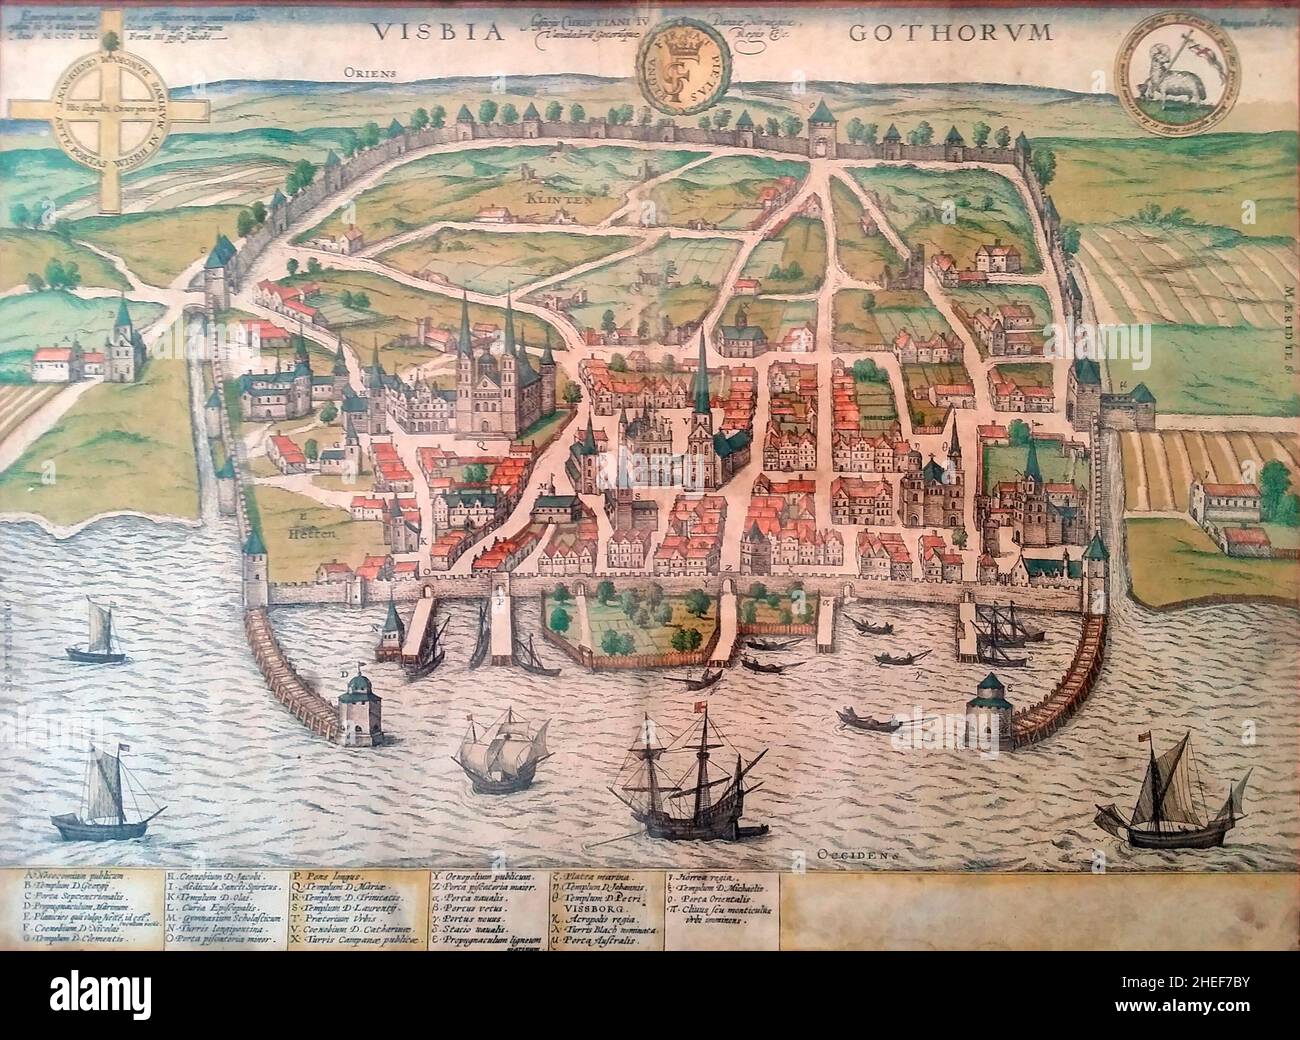 Visby as seen on an engraving from circa 1580 Stock Photo